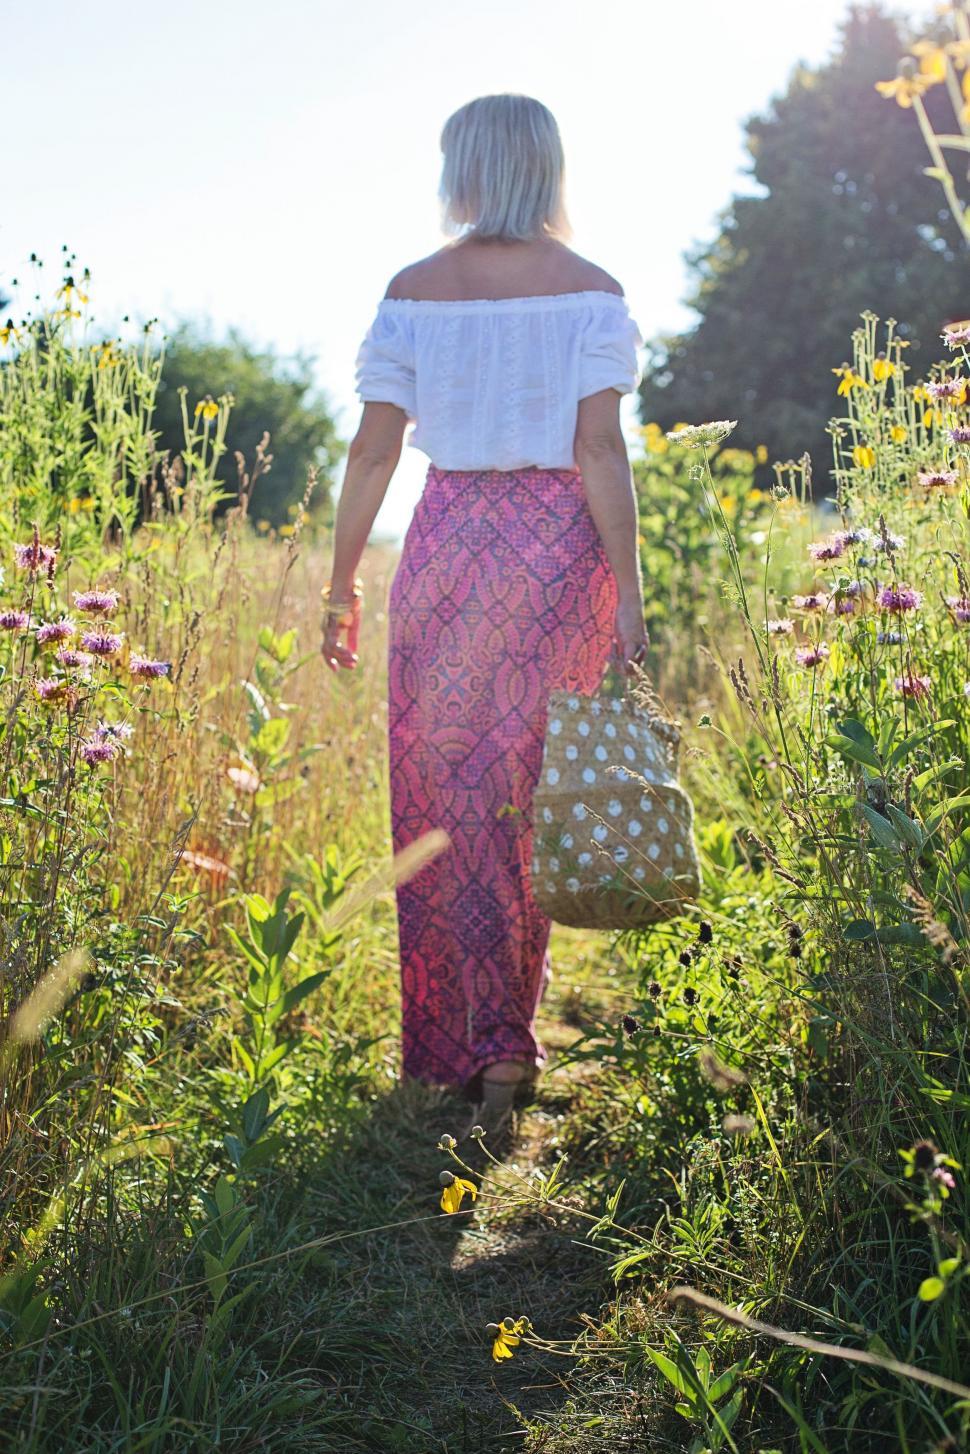 Free Image of Back View of Blonde Woman Walking in the Meadow  